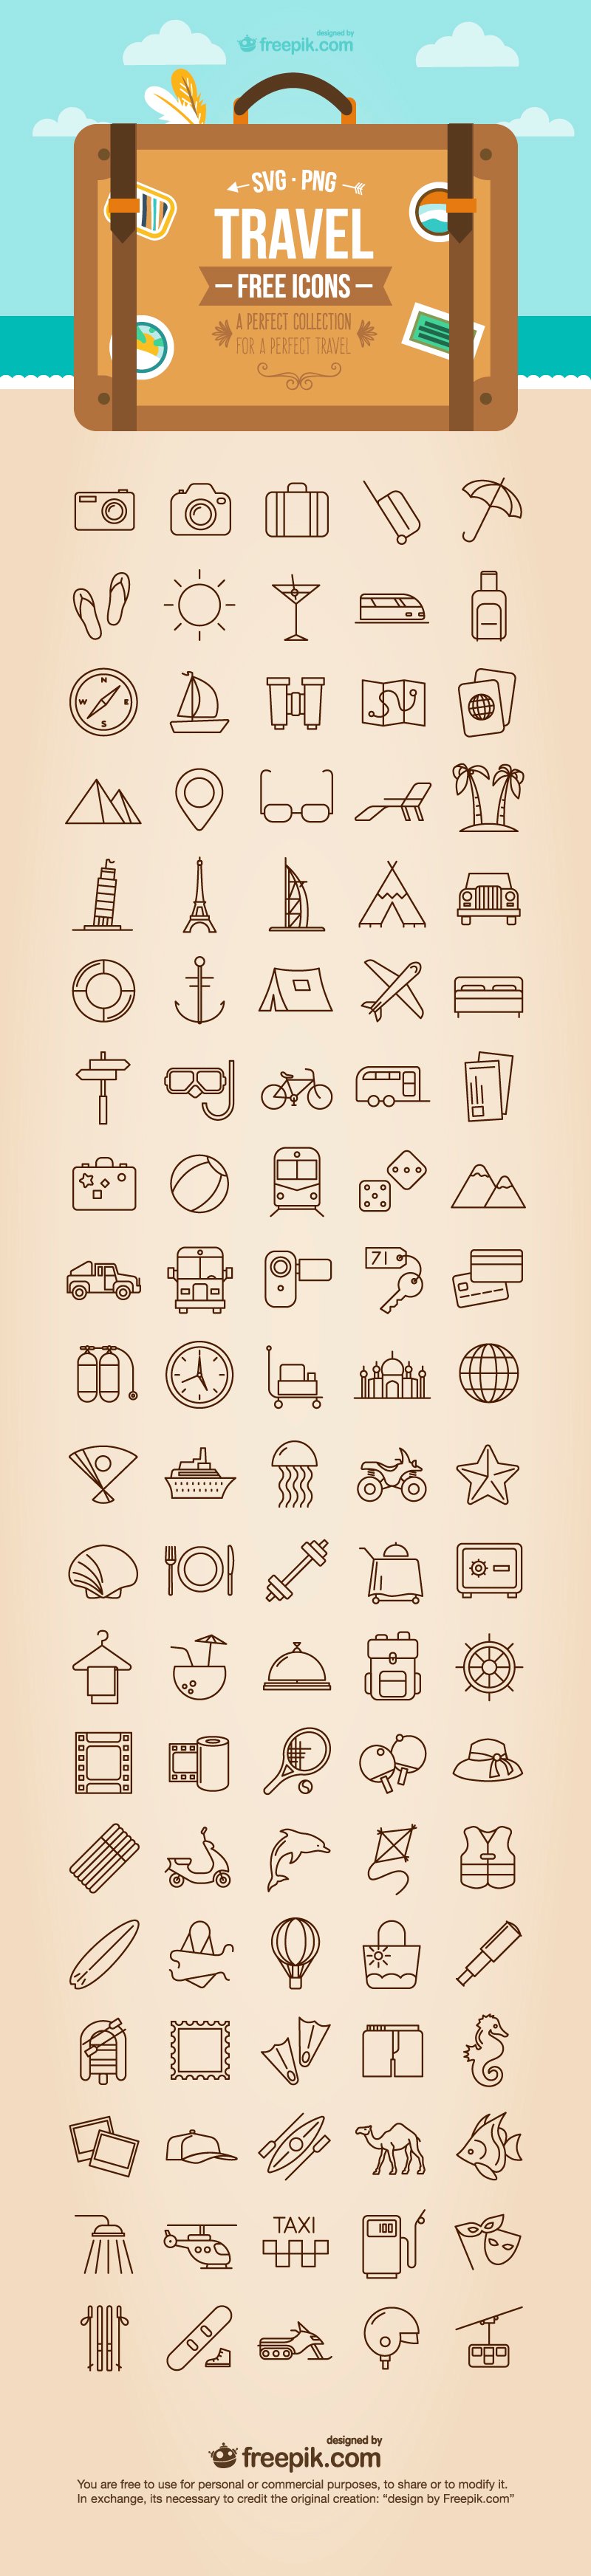 Free Travel Icons - SVG + PNG formats